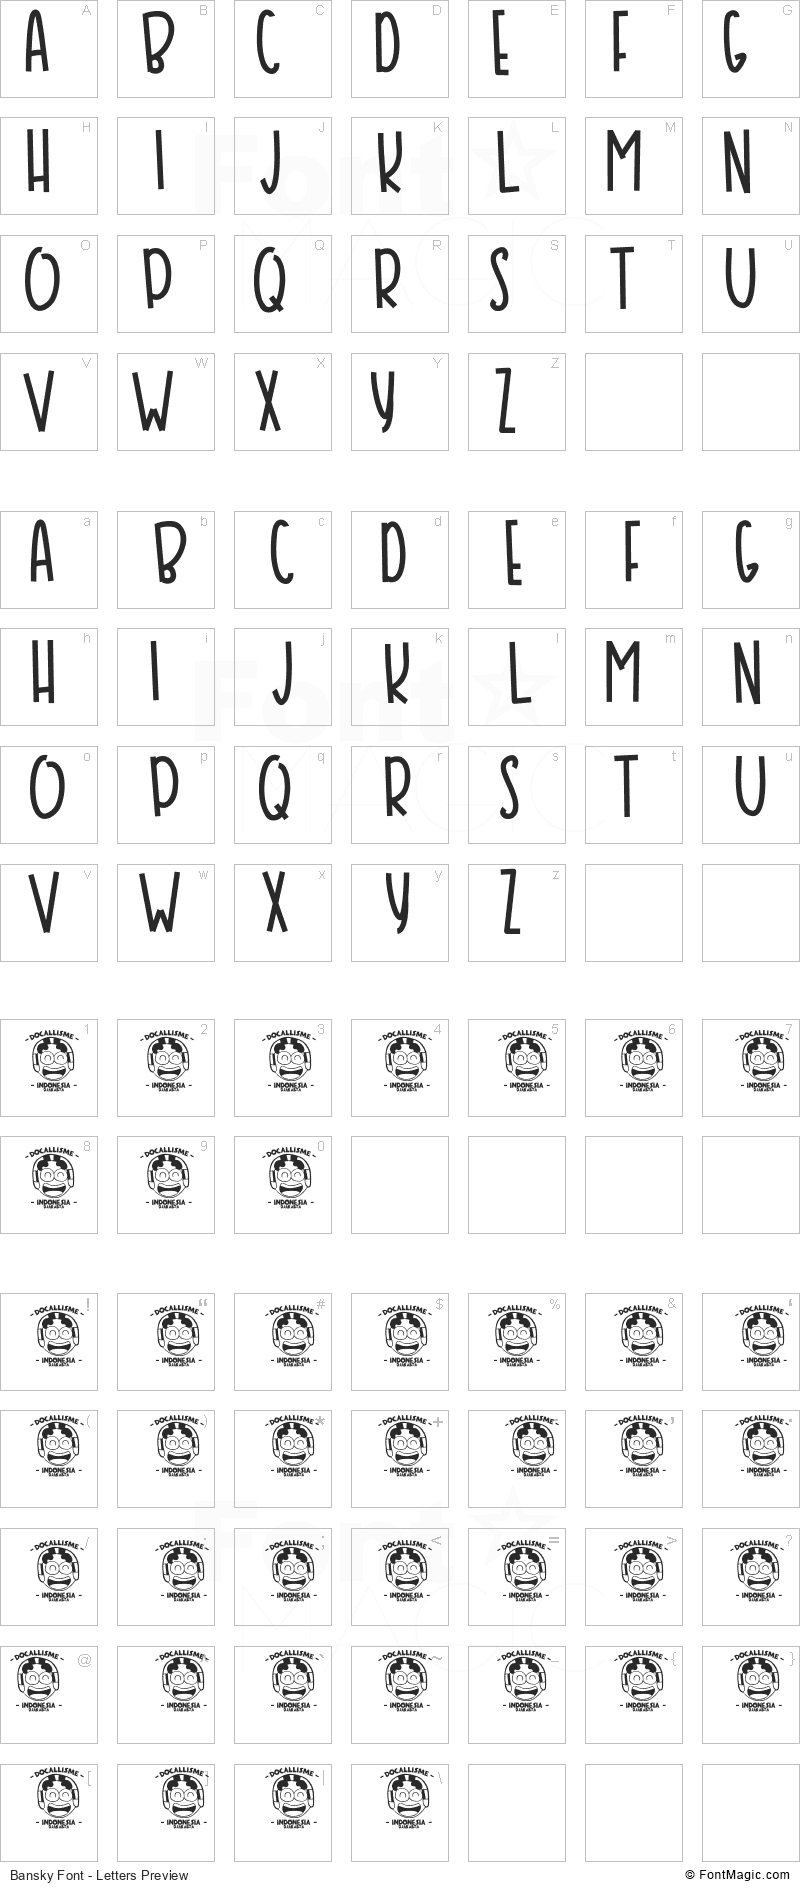 Bansky Font - All Latters Preview Chart